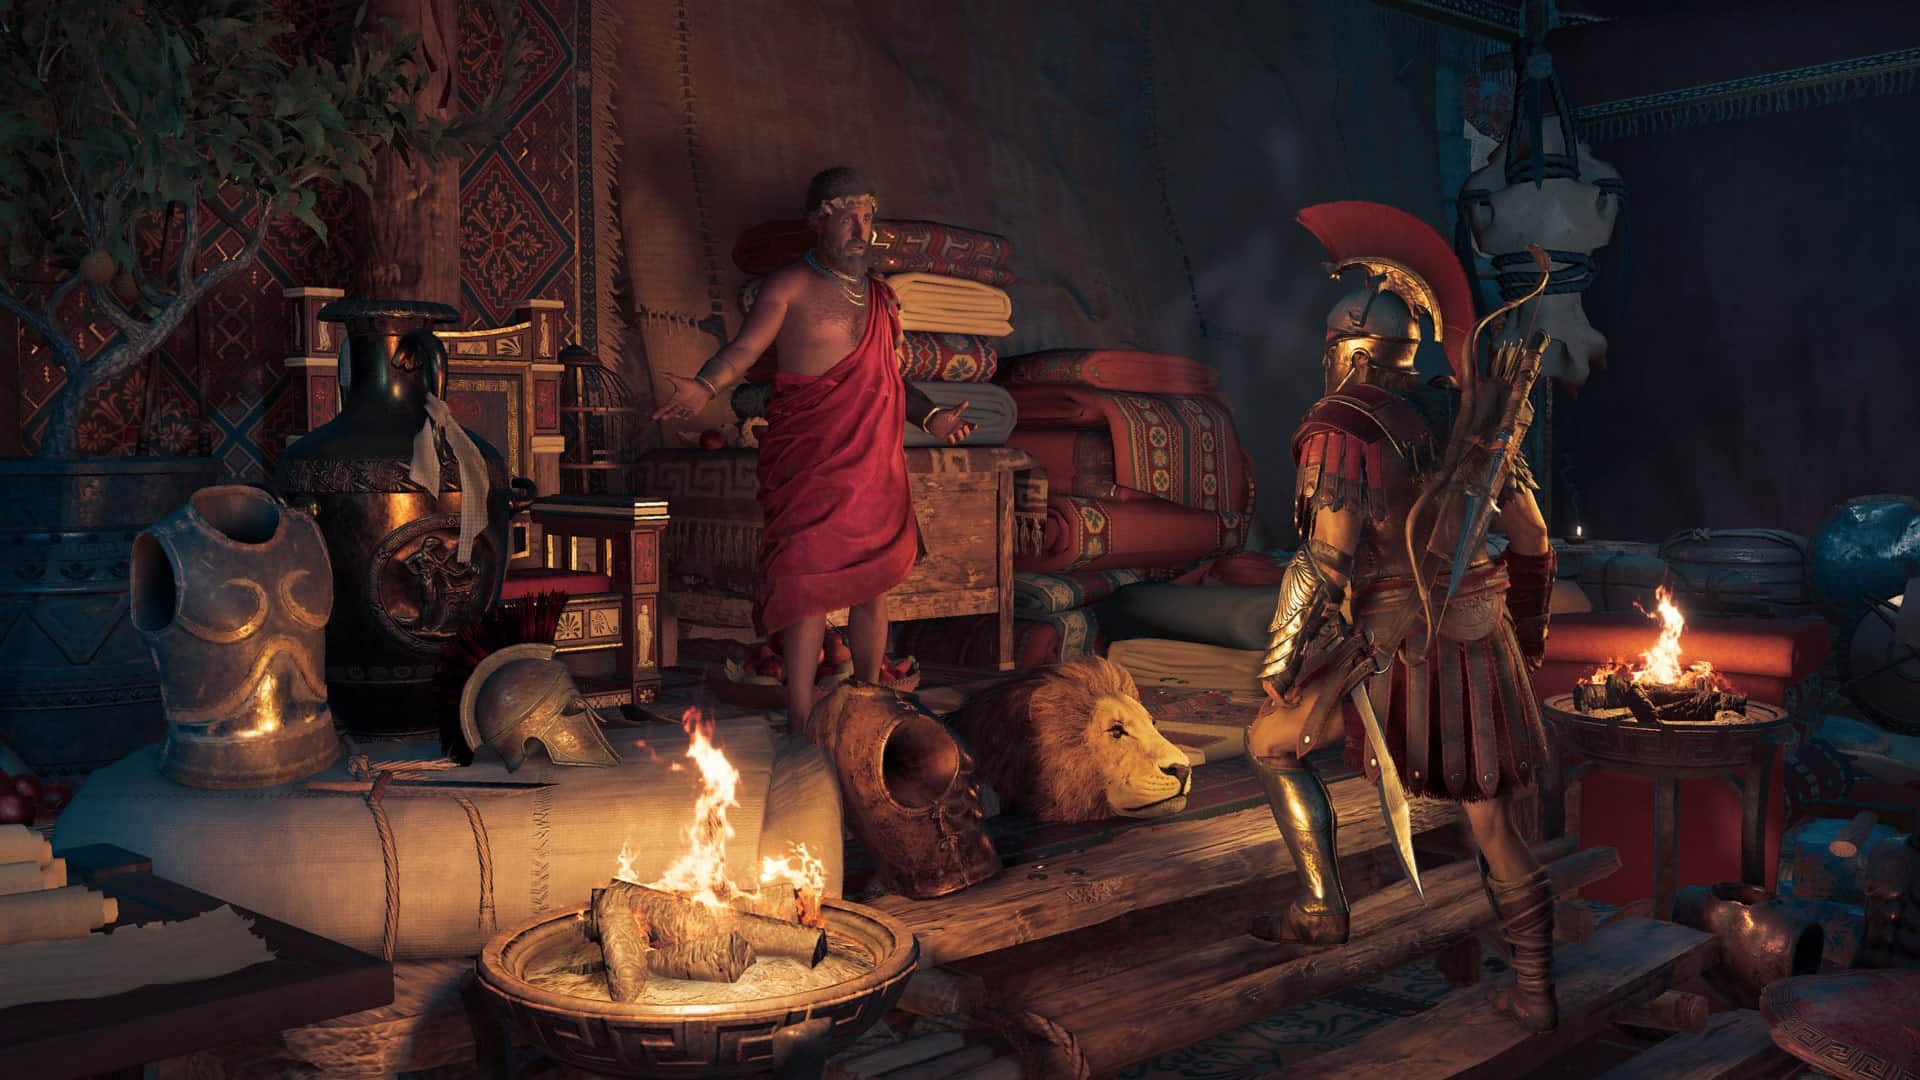 Assassin's Creed: Odyssey Review